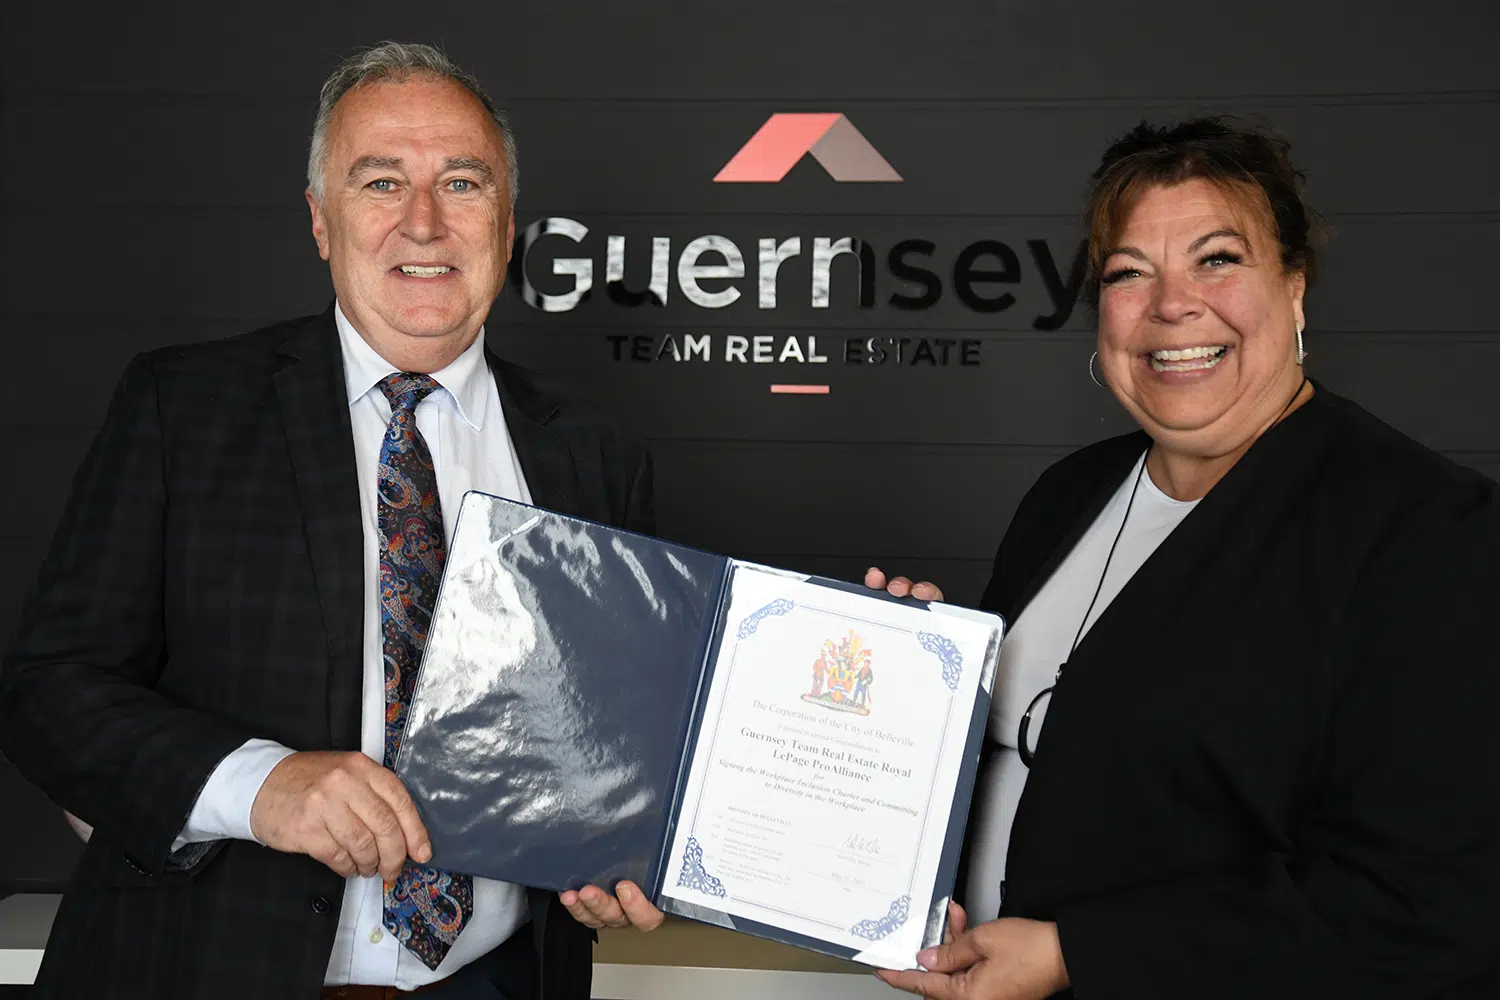 First realty team signs Workplace Inclusion Charter